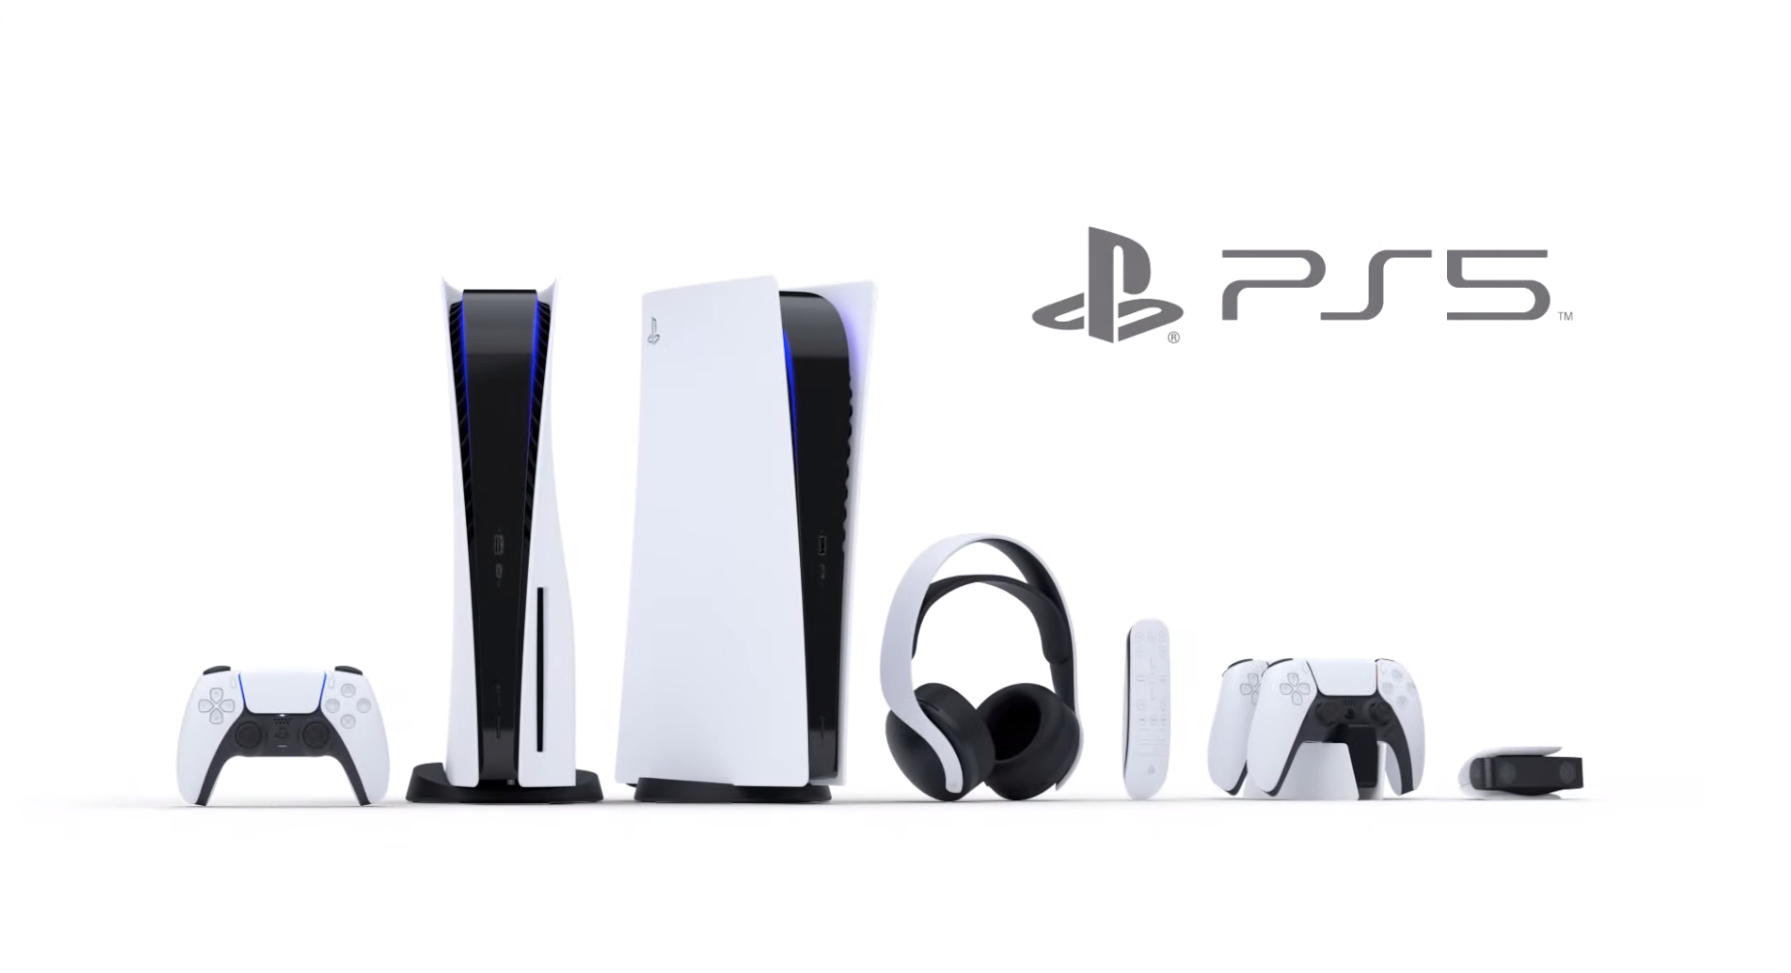 PlayStation 5 (PS5) – The early specification